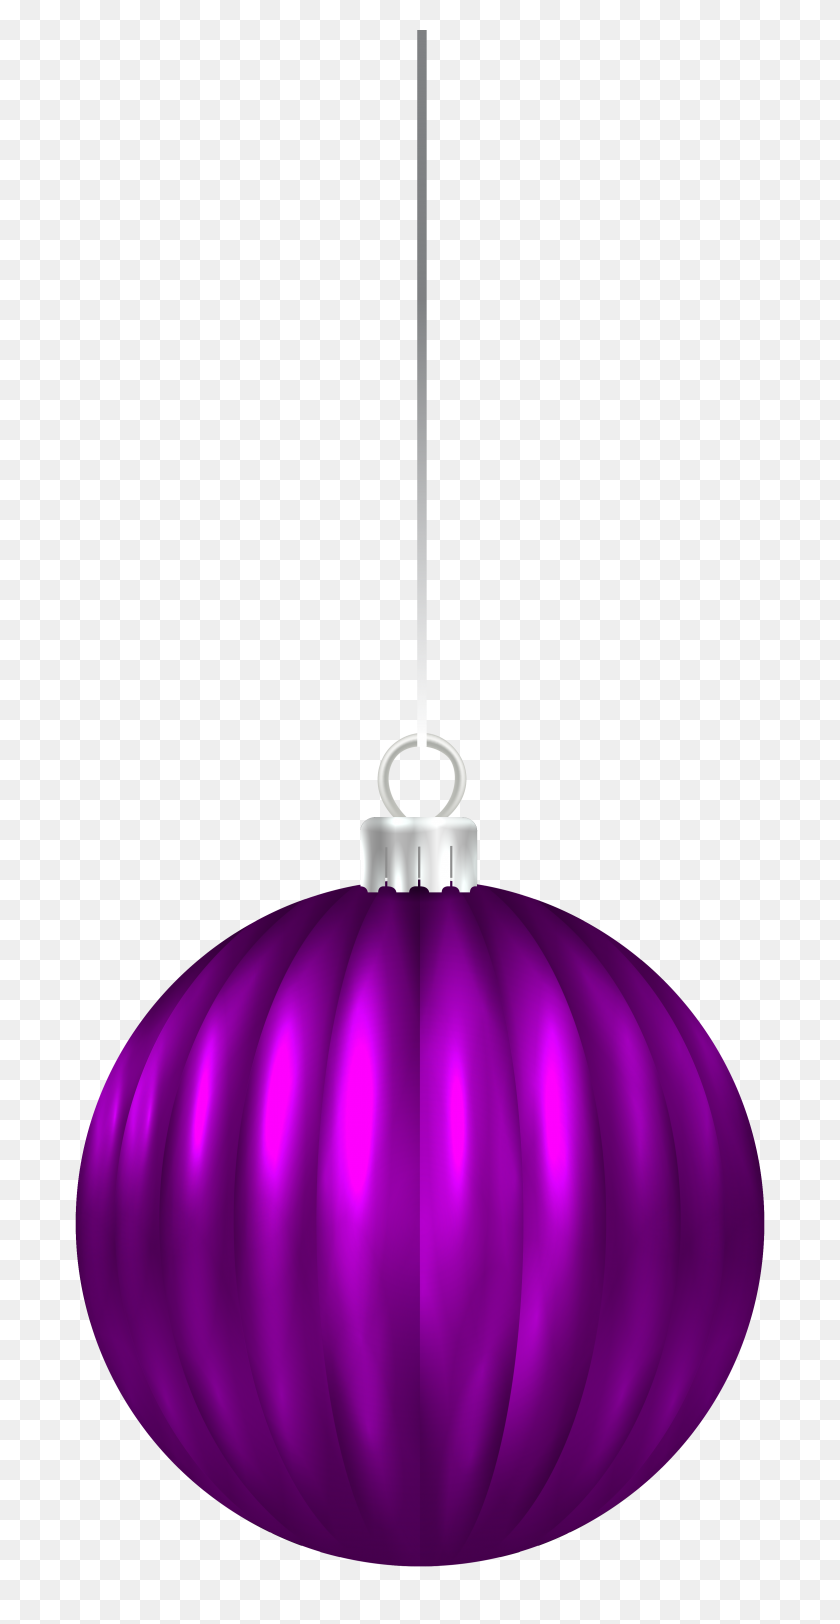 3106x6228 Purple Christmas Ball Ornament Png Clip Art Gallery - Ornament PNG